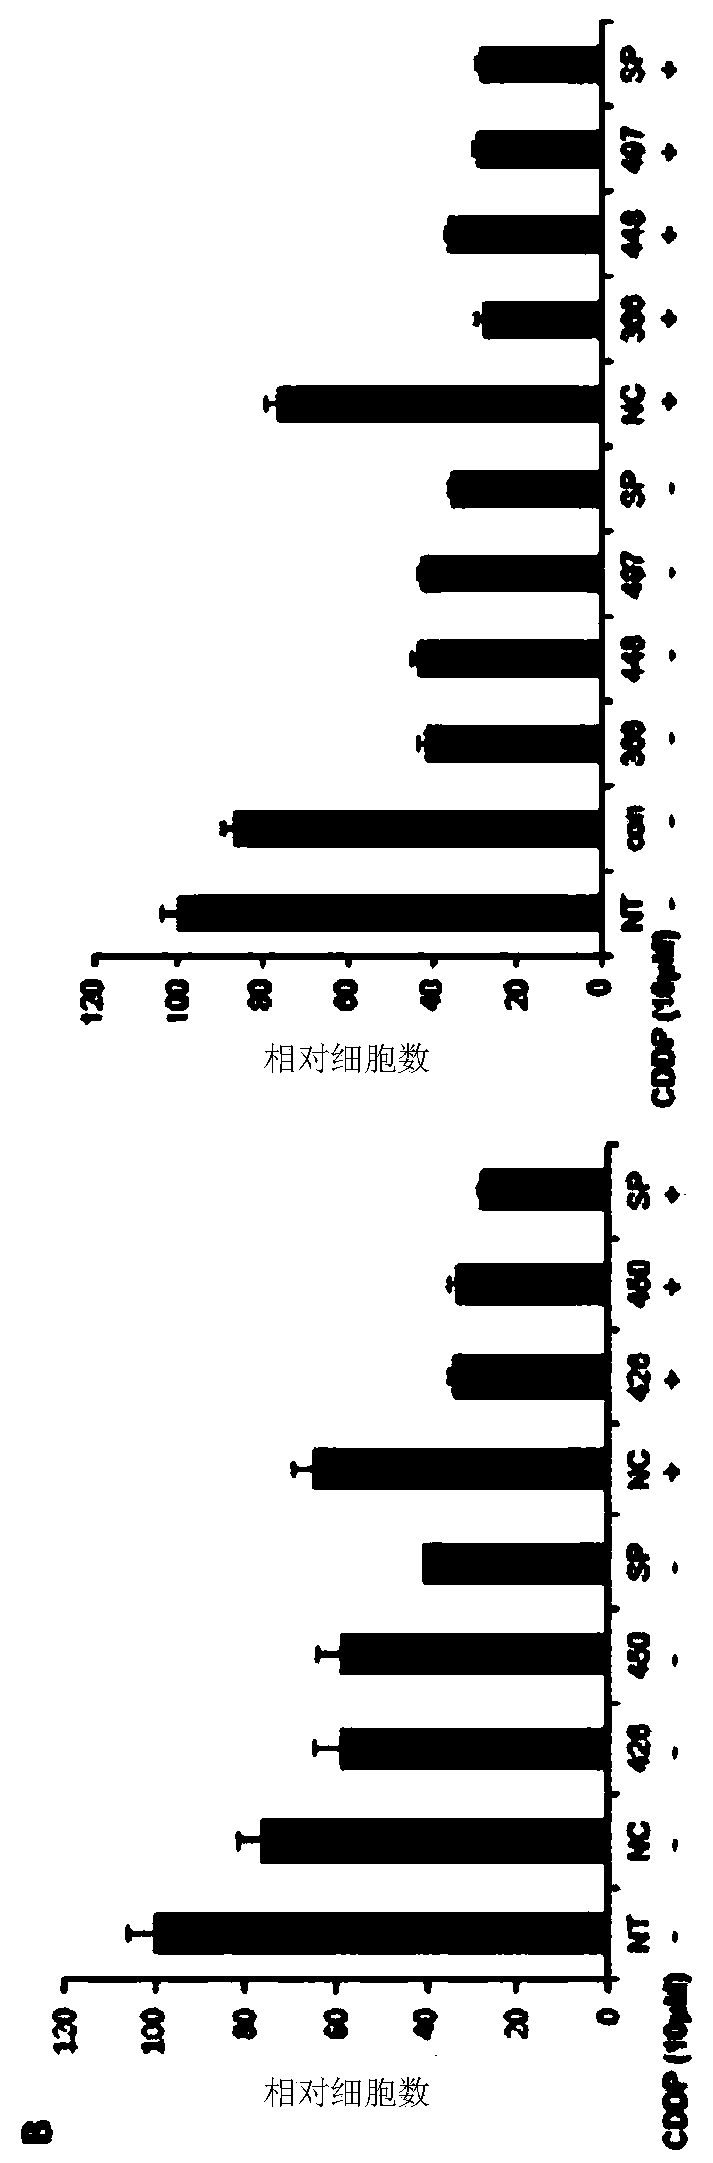 METHOD FOR MAINTAINING INCREASED INTRACELLULAR p53 LEVEL, INDUCED BY PLATINUM-BASED ANTICANCER DRUG, AND APPLICATION THEREOF